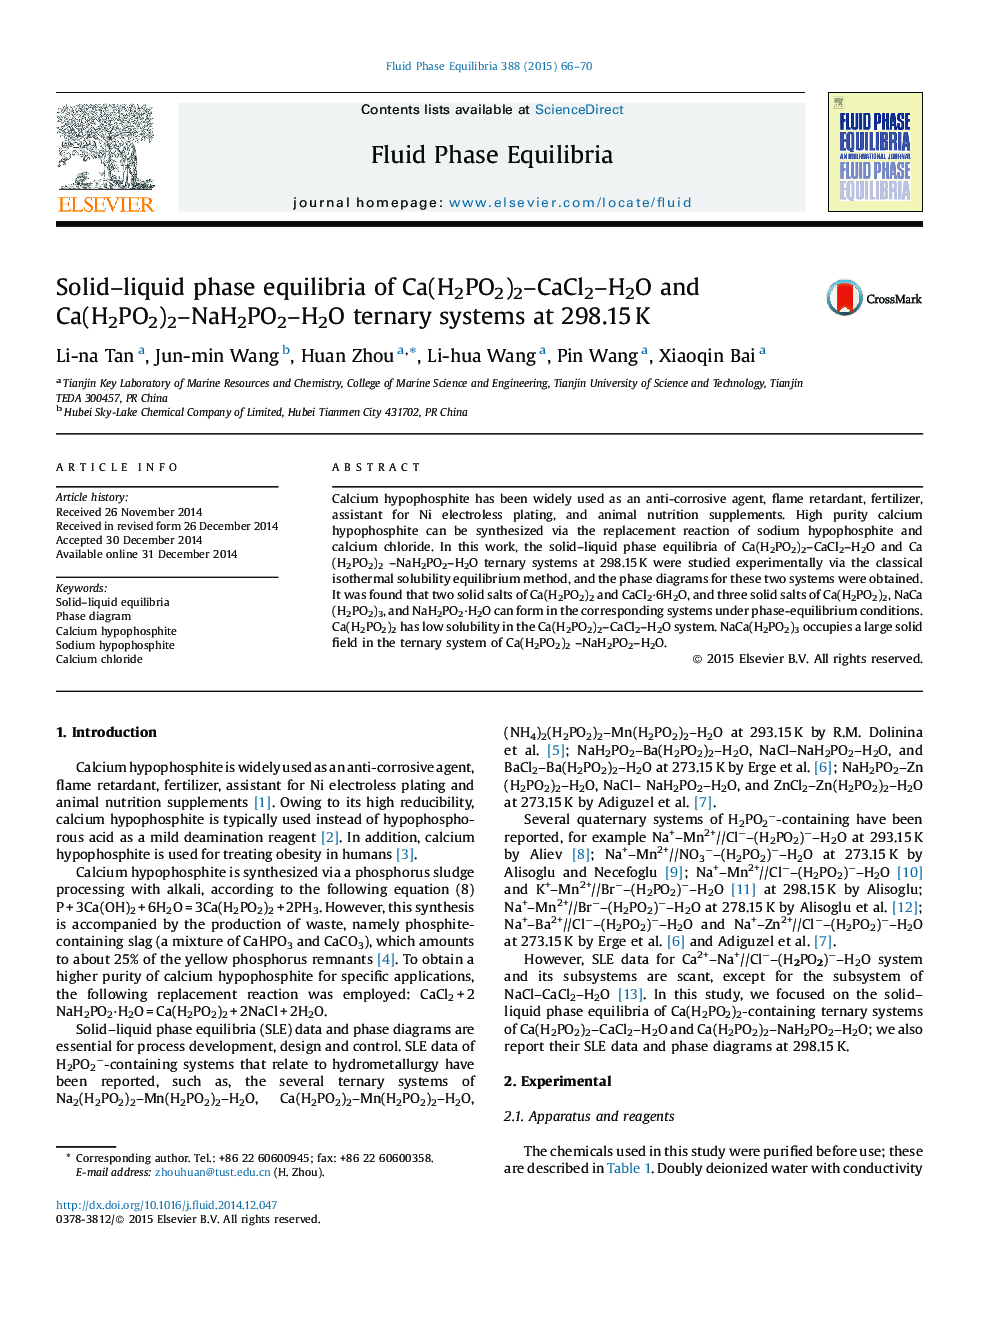 Solid–liquid phase equilibria of Ca(H2PO2)2–CaCl2–H2O and Ca(H2PO2)2–NaH2PO2–H2O ternary systems at 298.15 K